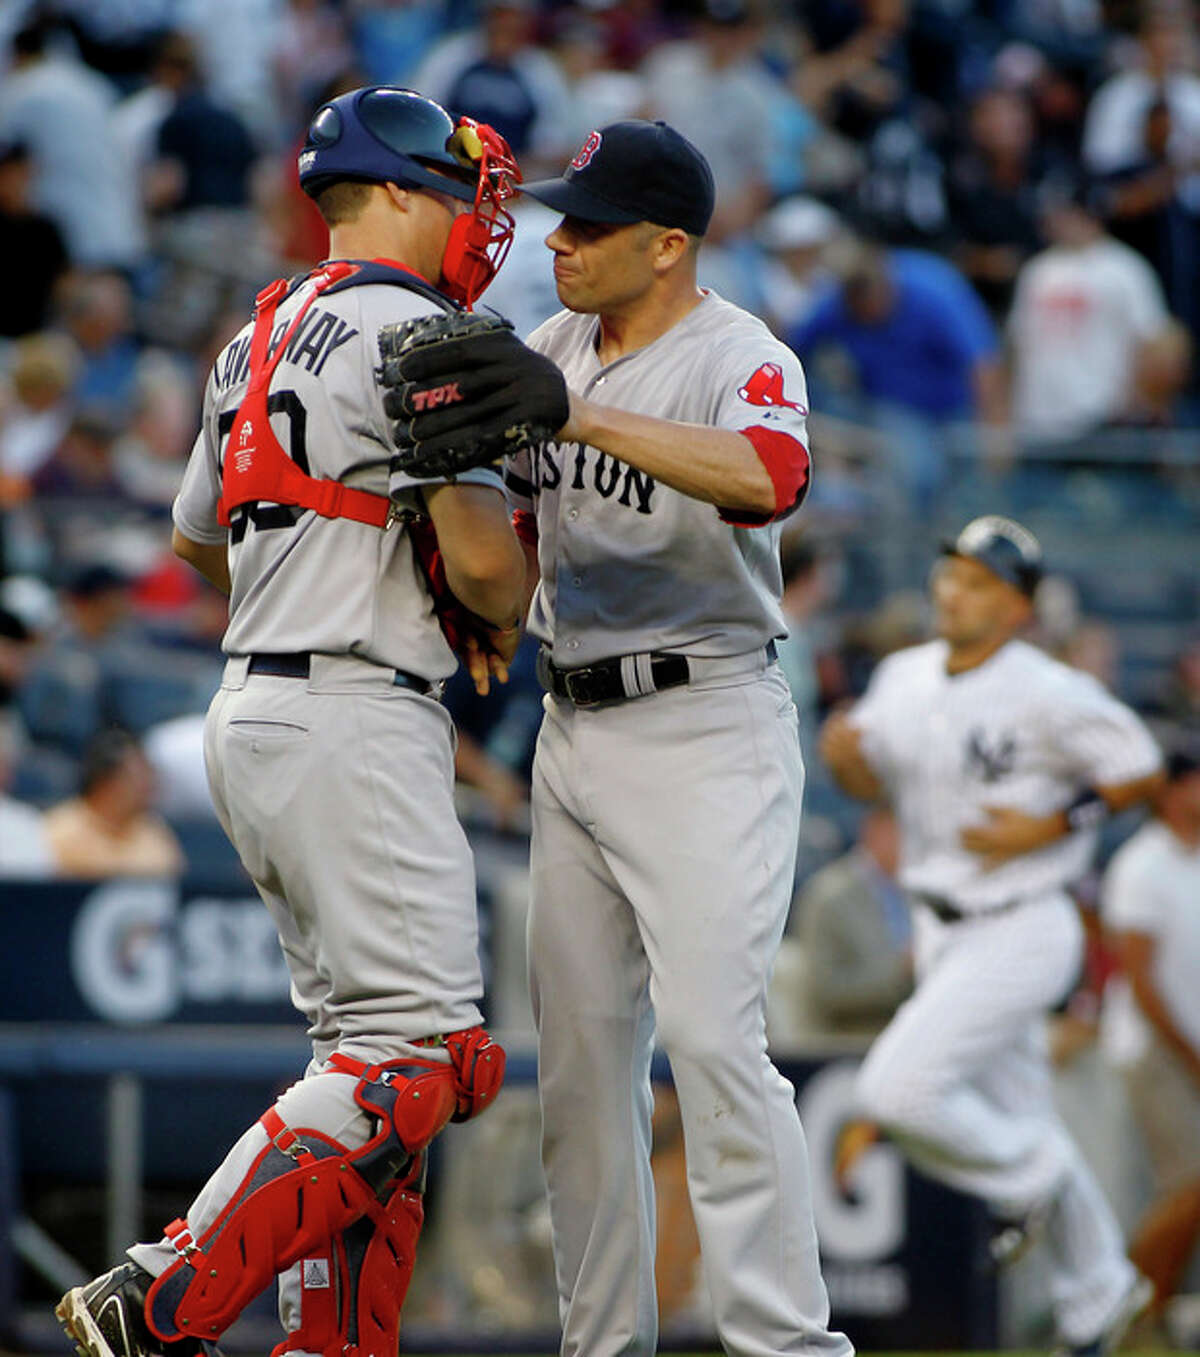 Boston Red Sox's Ryan Lavarnway (60) congratulates pitcher Alfredo Aceves, right, after he closed out the New York Yankees in the ninth inning of a baseball game, Saturday, Aug. 18, 2012, at Yankee Stadium in New York. The Red Sox defeated the Yankees 4-1. (AP Photo/John Dunn)